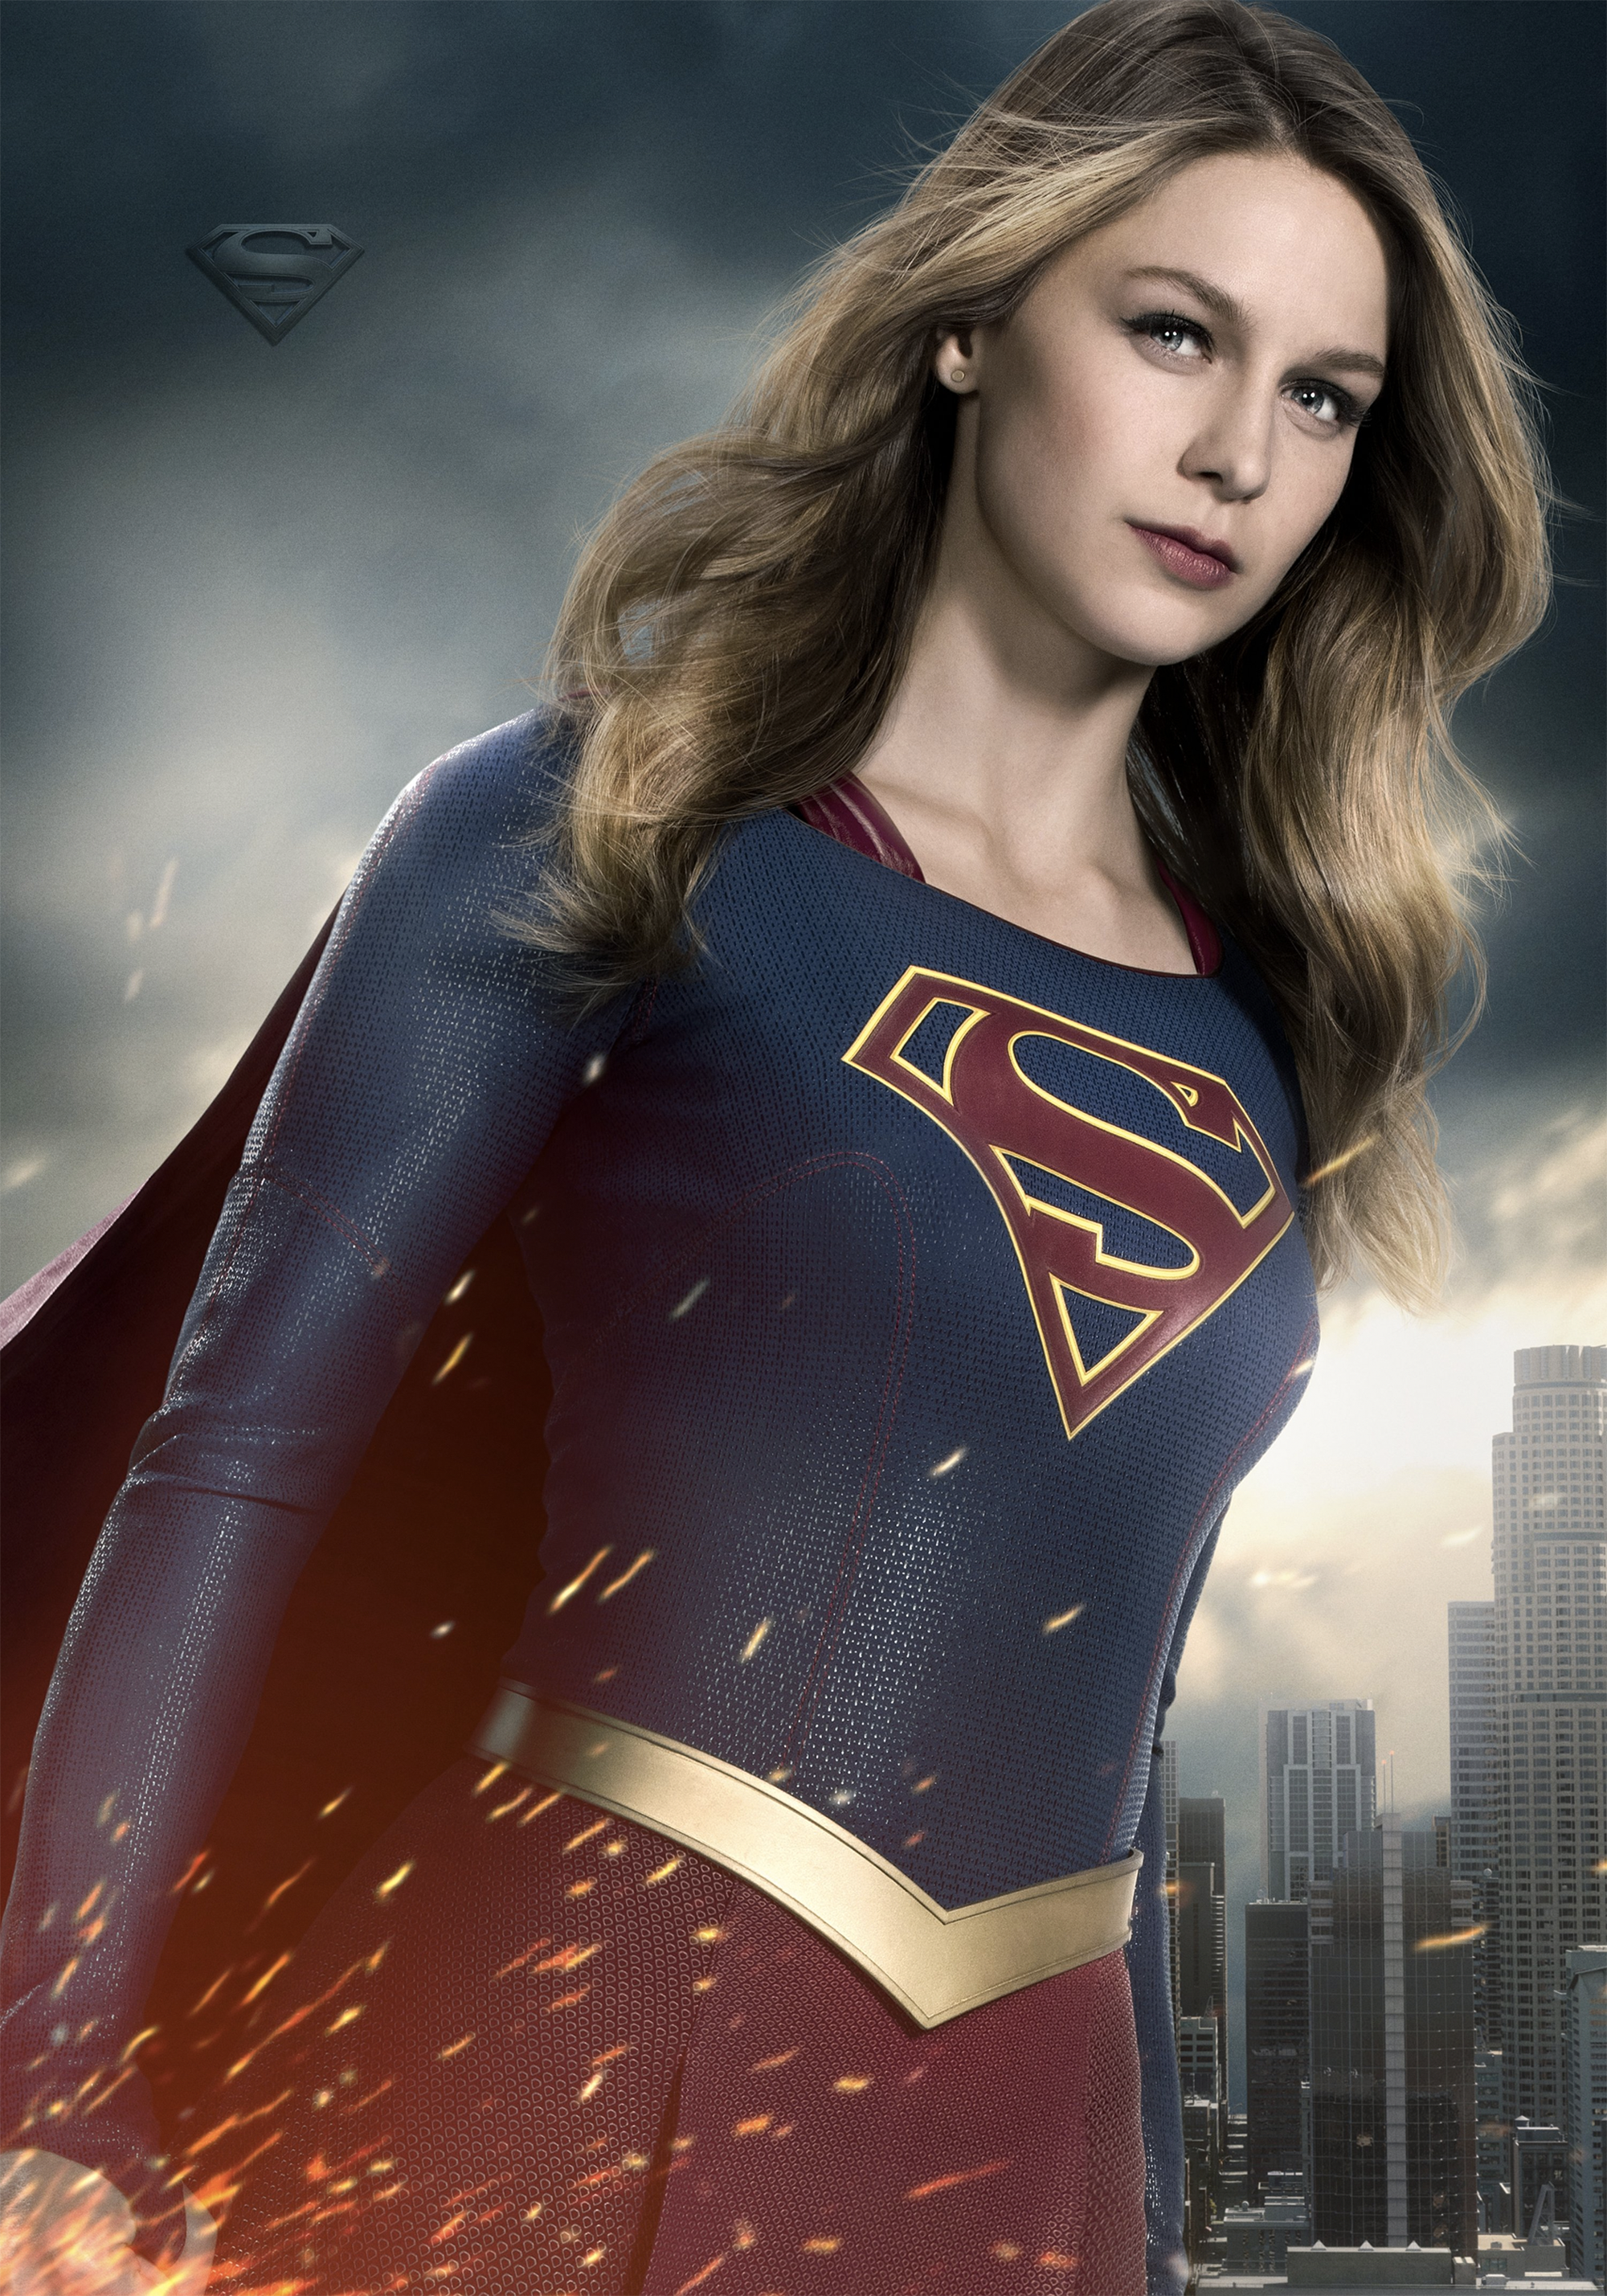 Image - Supergirl season 2 character portrait.png | Arrowverse Wiki